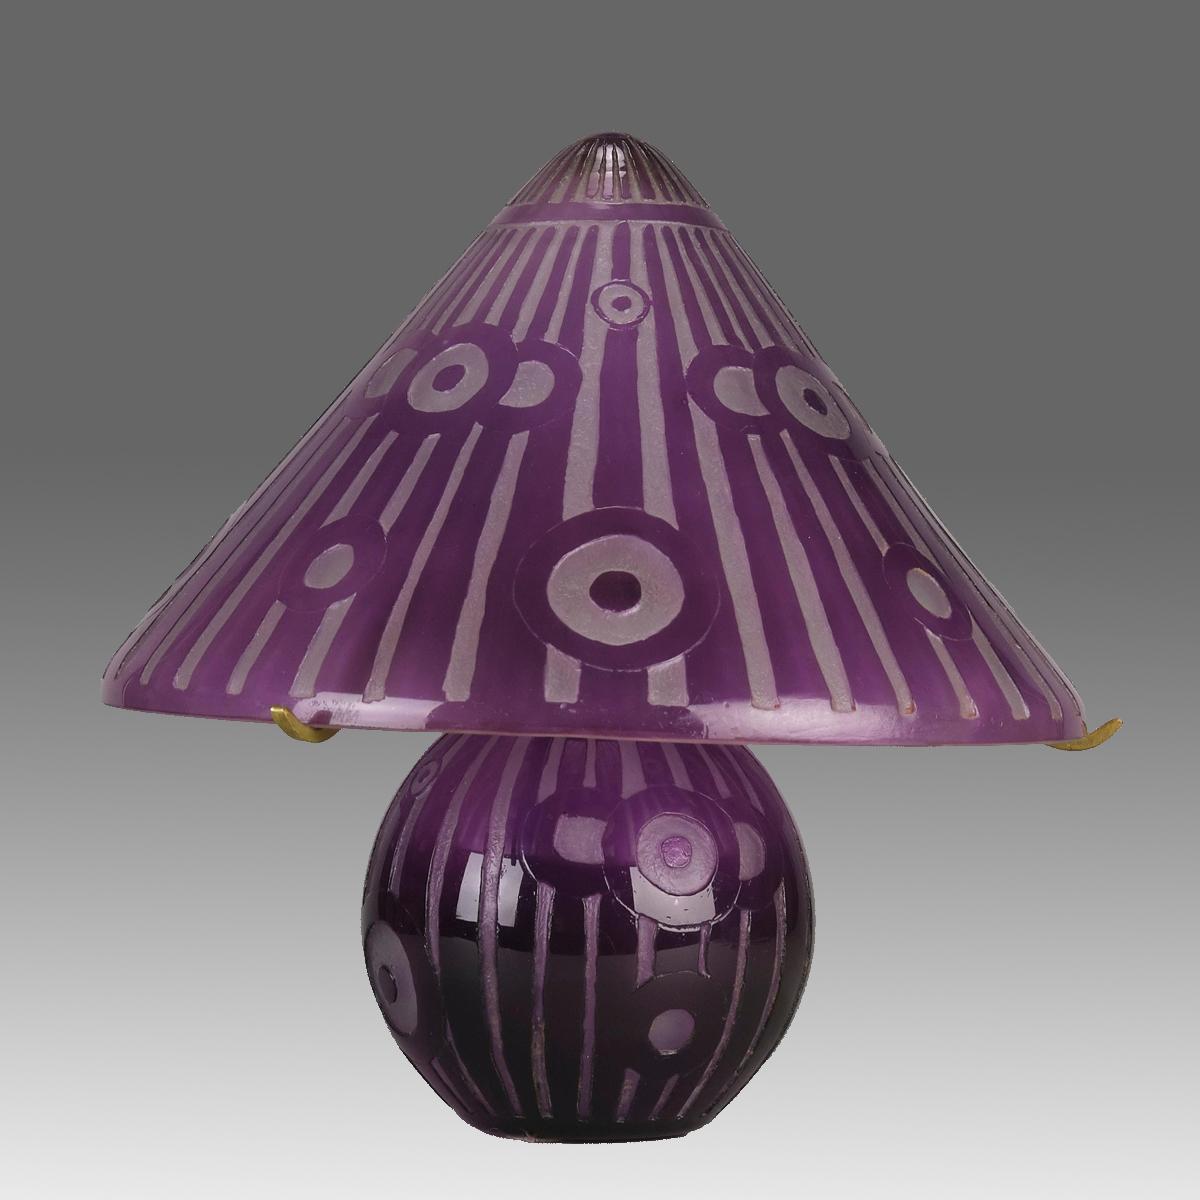 An attarctive early 20th Century Art Deco cameo glass lamp etched with a striking Art Deco design and cased in a deep purple colour, exhibiting excellent colour and detail. Signed Daum Nancy on rim of shade.
ADDITIONAL INFORMATION
Height:           